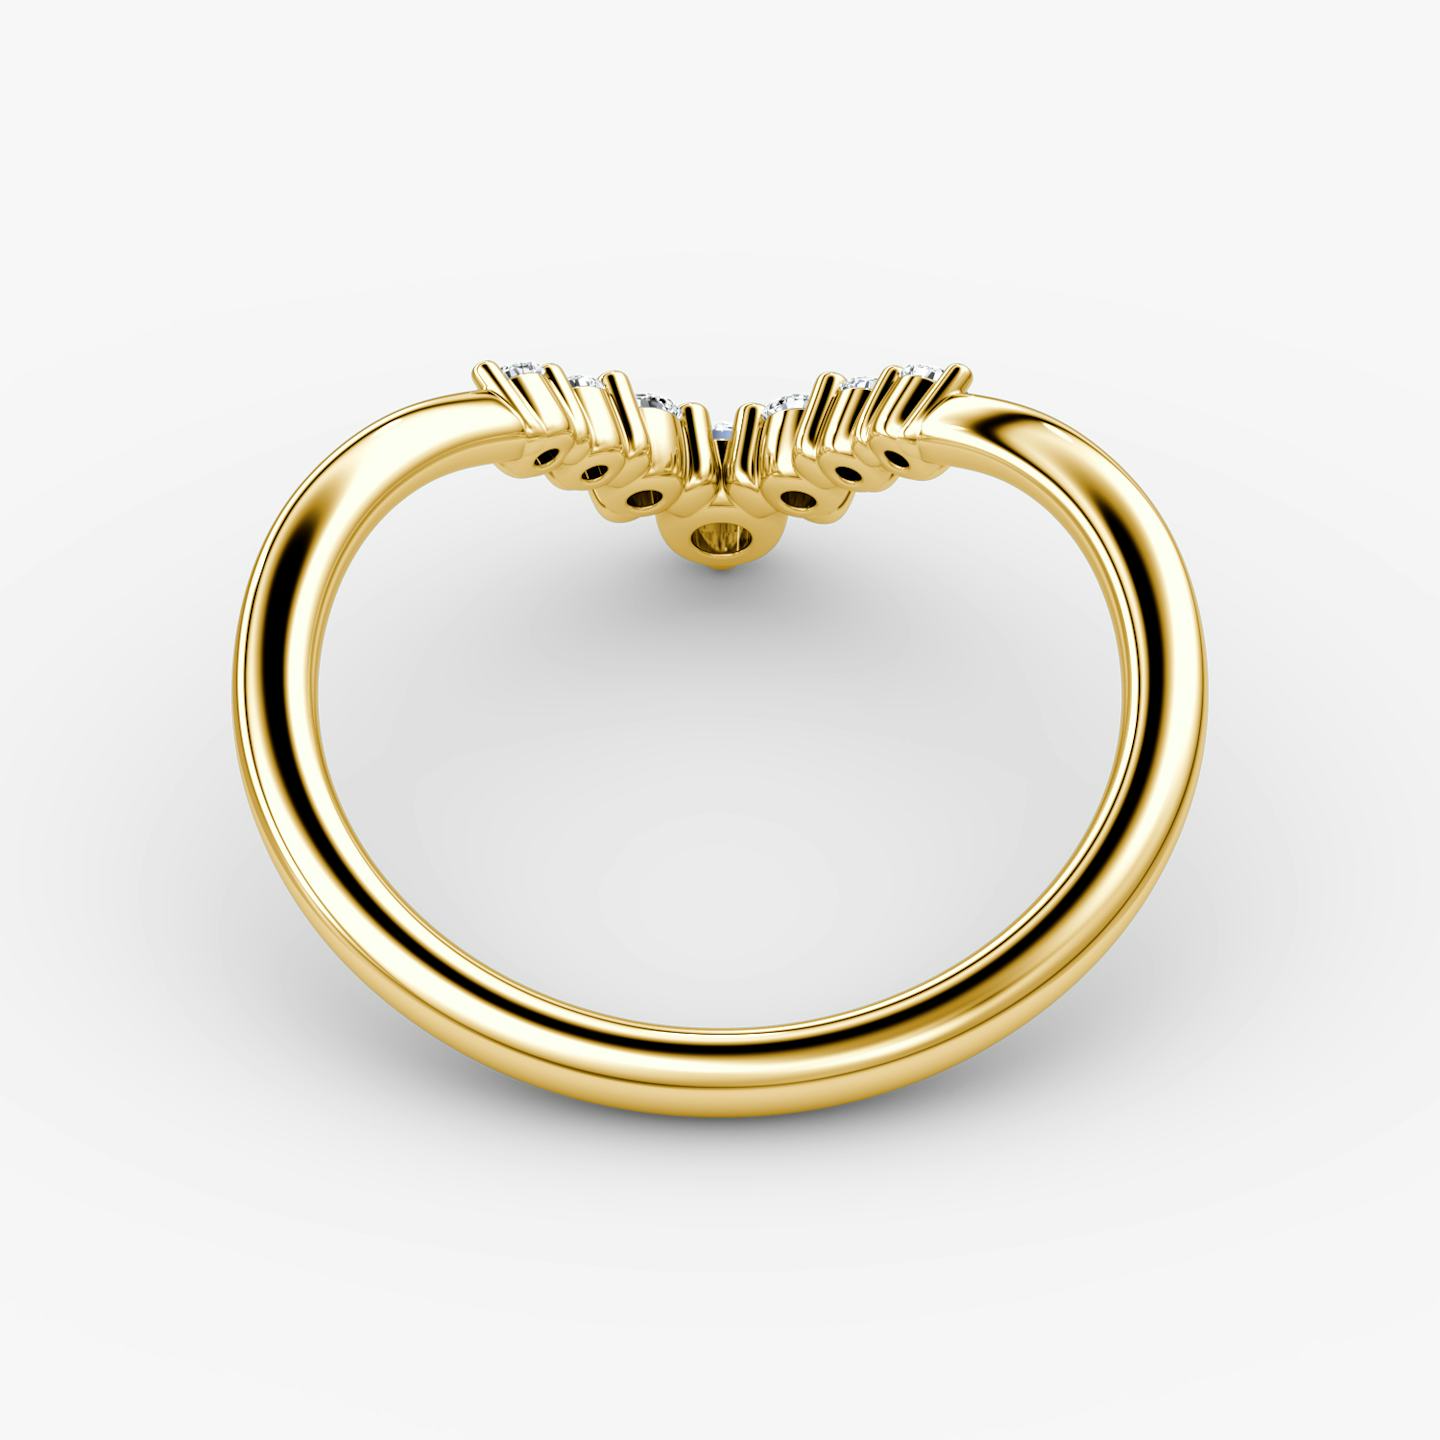 The Dew Drop Crown Band | Round Brilliant | 18k | 18k Yellow Gold | Band: Plain